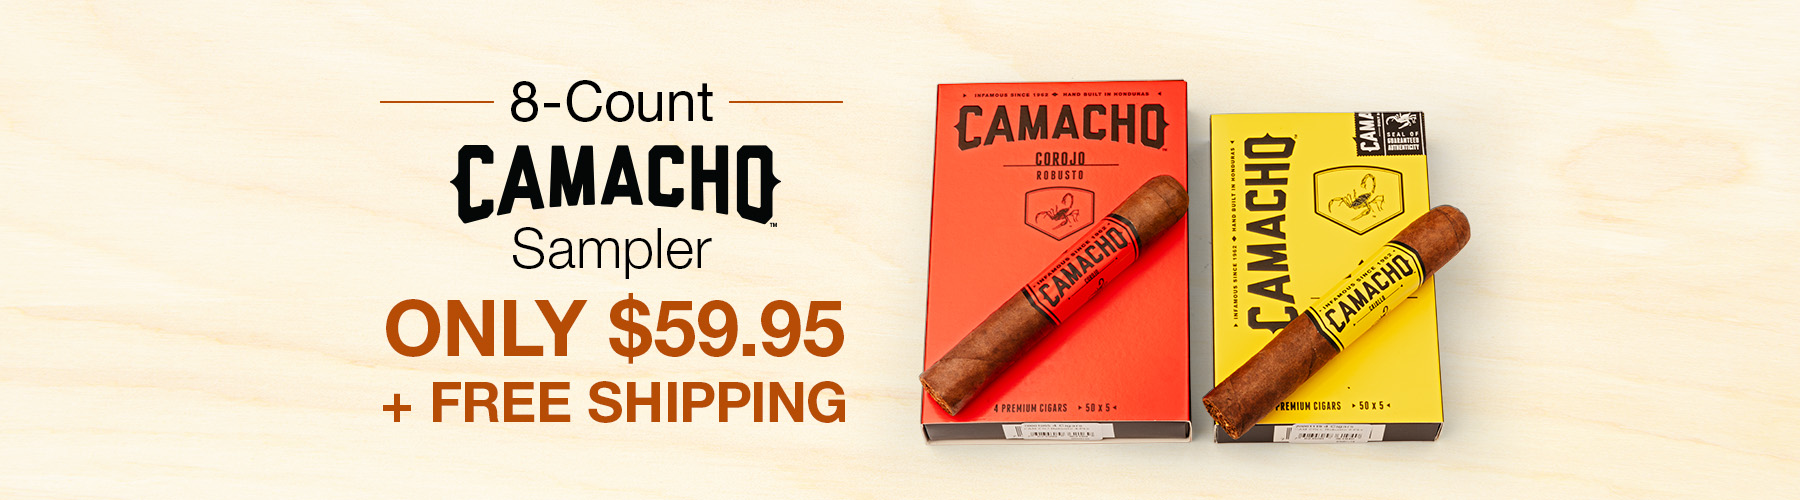 8-Count Camacho Sampler Only $59.95 + free shipping!